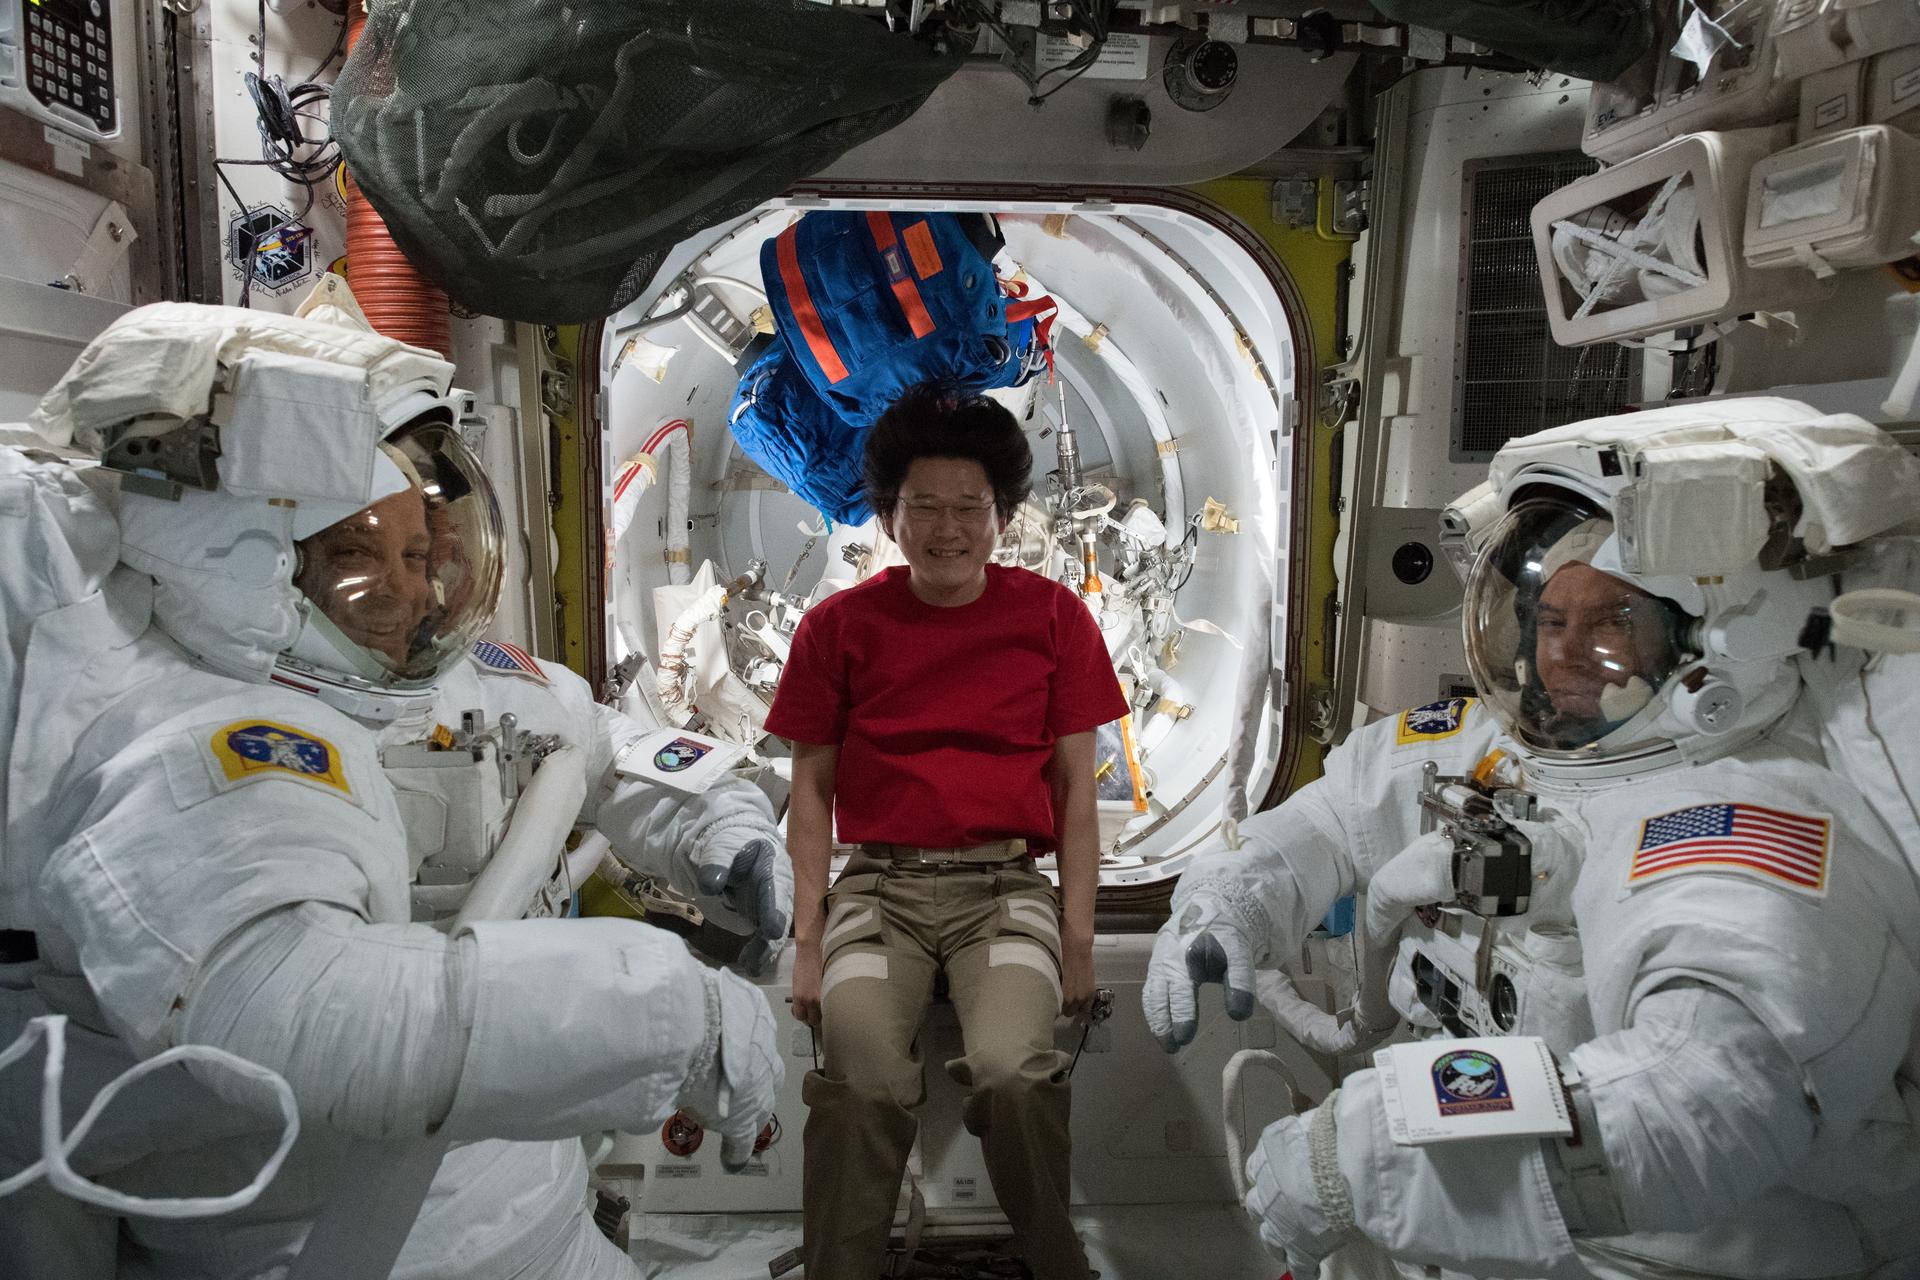 Expedition 56 NASA astronauts Ricky Arnold (left) and Drew Feustel (right) are pictured with Norishige Kanai (center) from JAXA